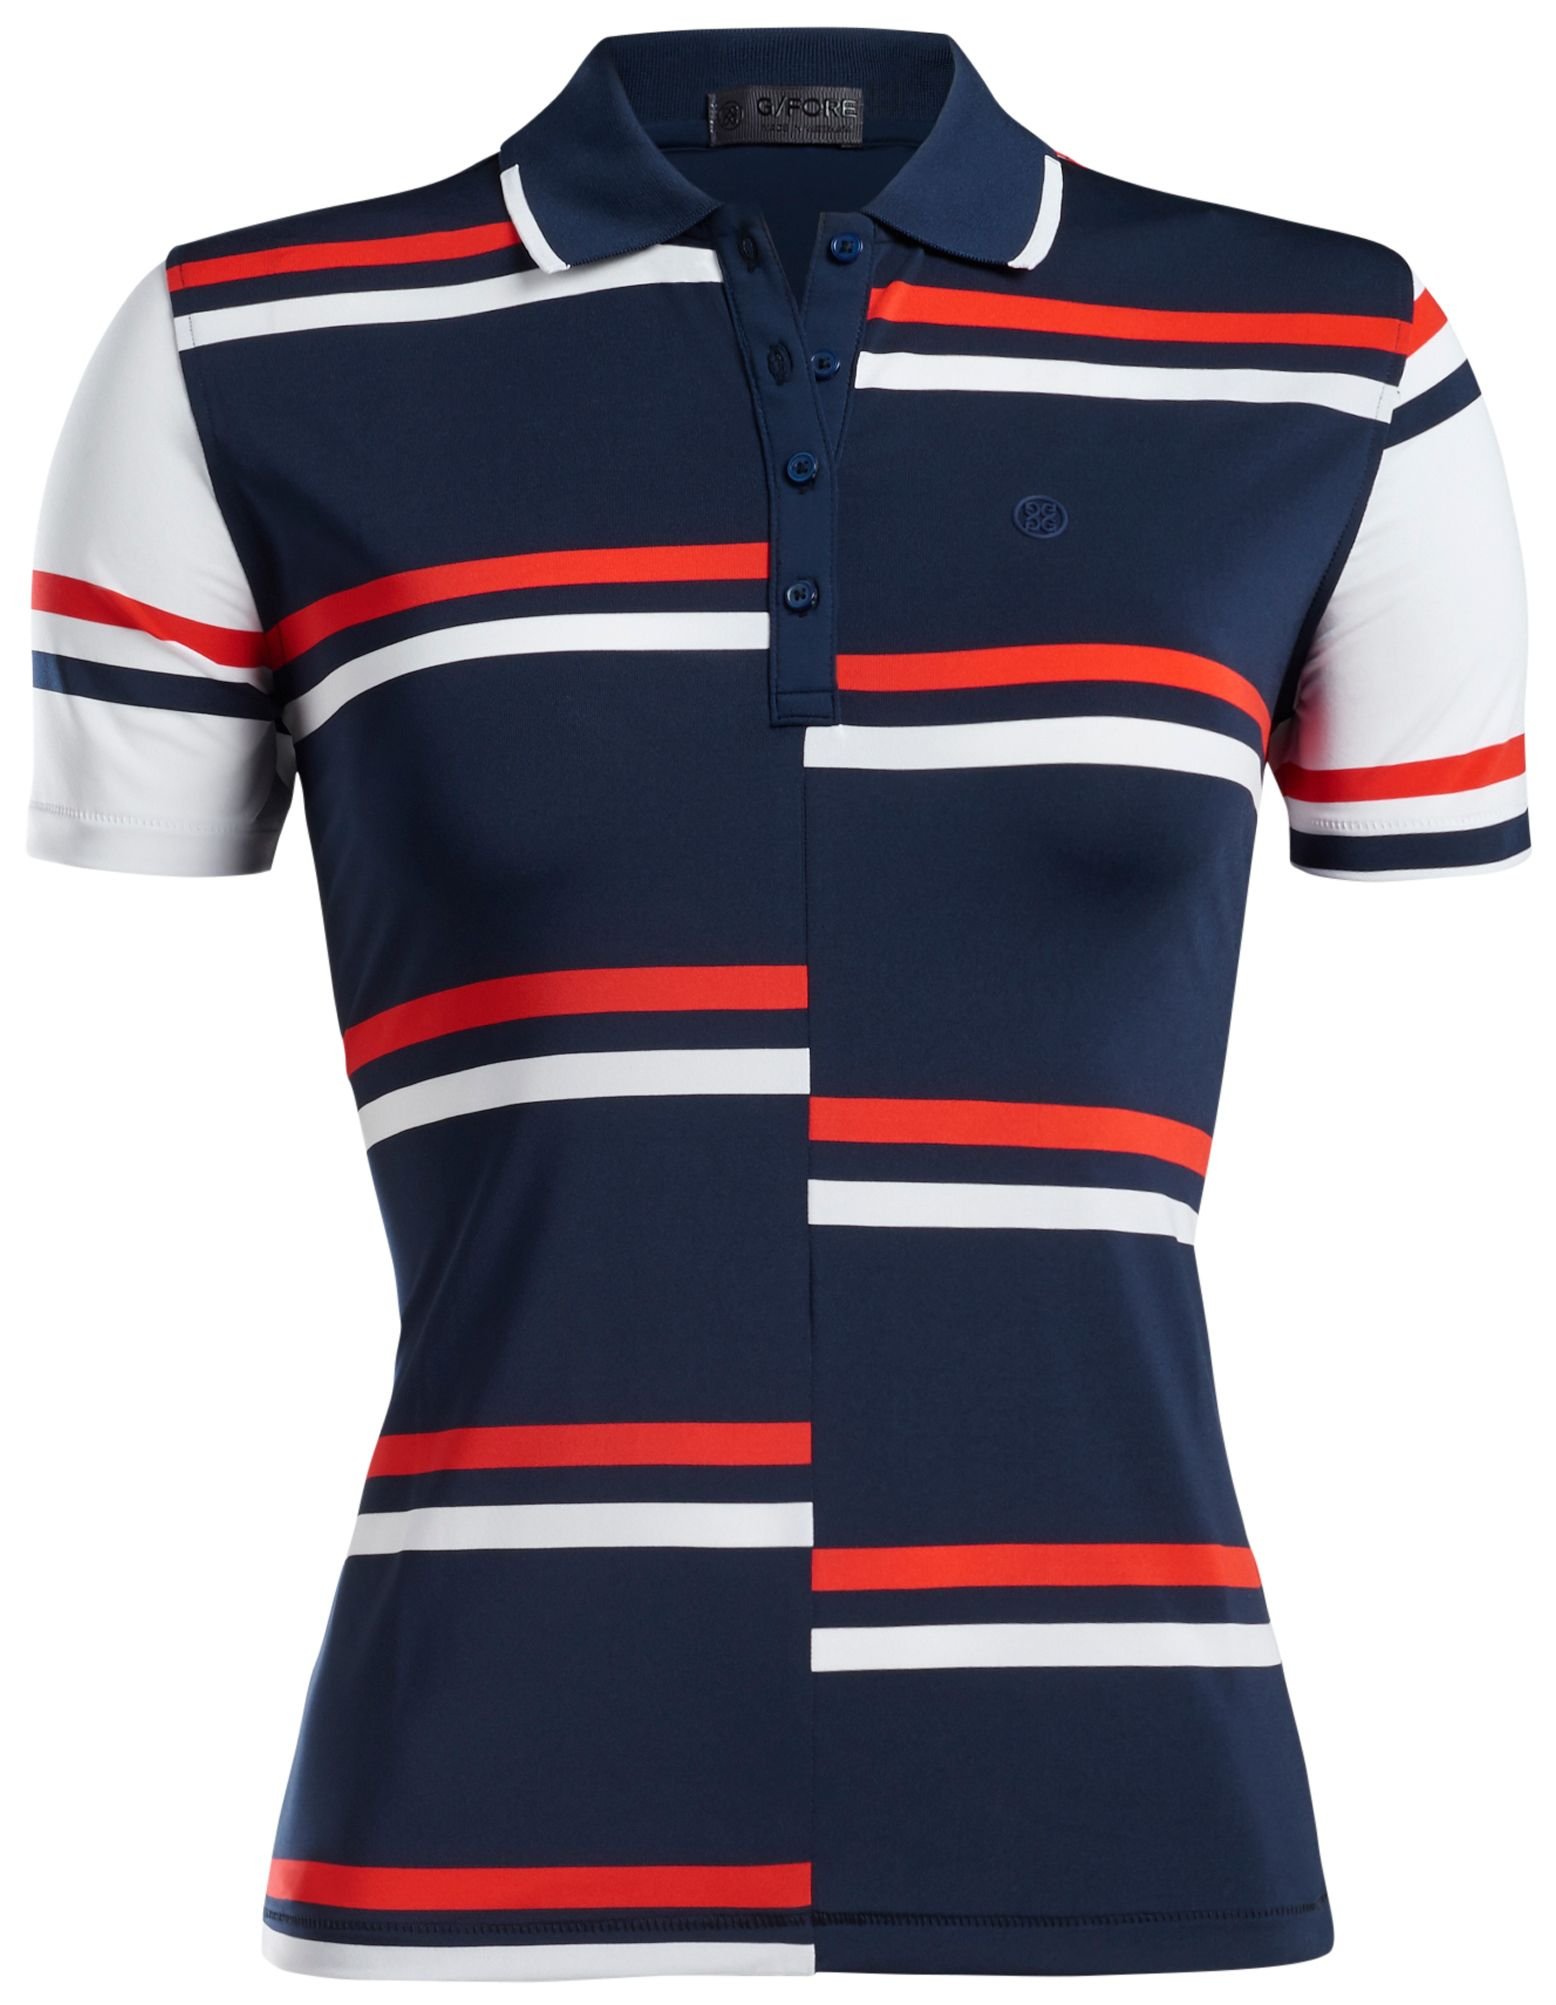 G/FORE Women's Offset Stripe Golf Polo Shirt - Carl's Golfland